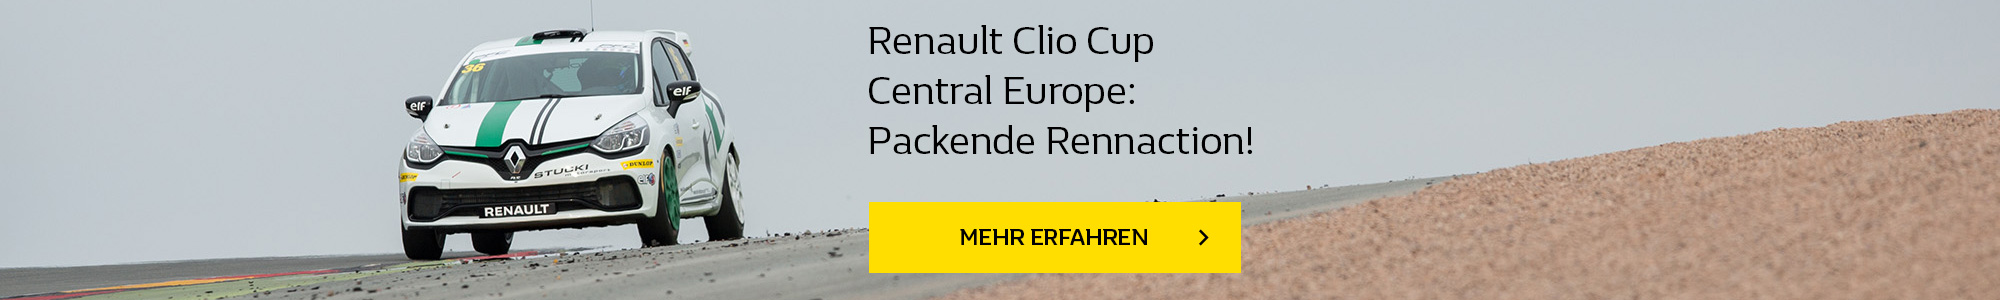 Renault Clio Cup Europe